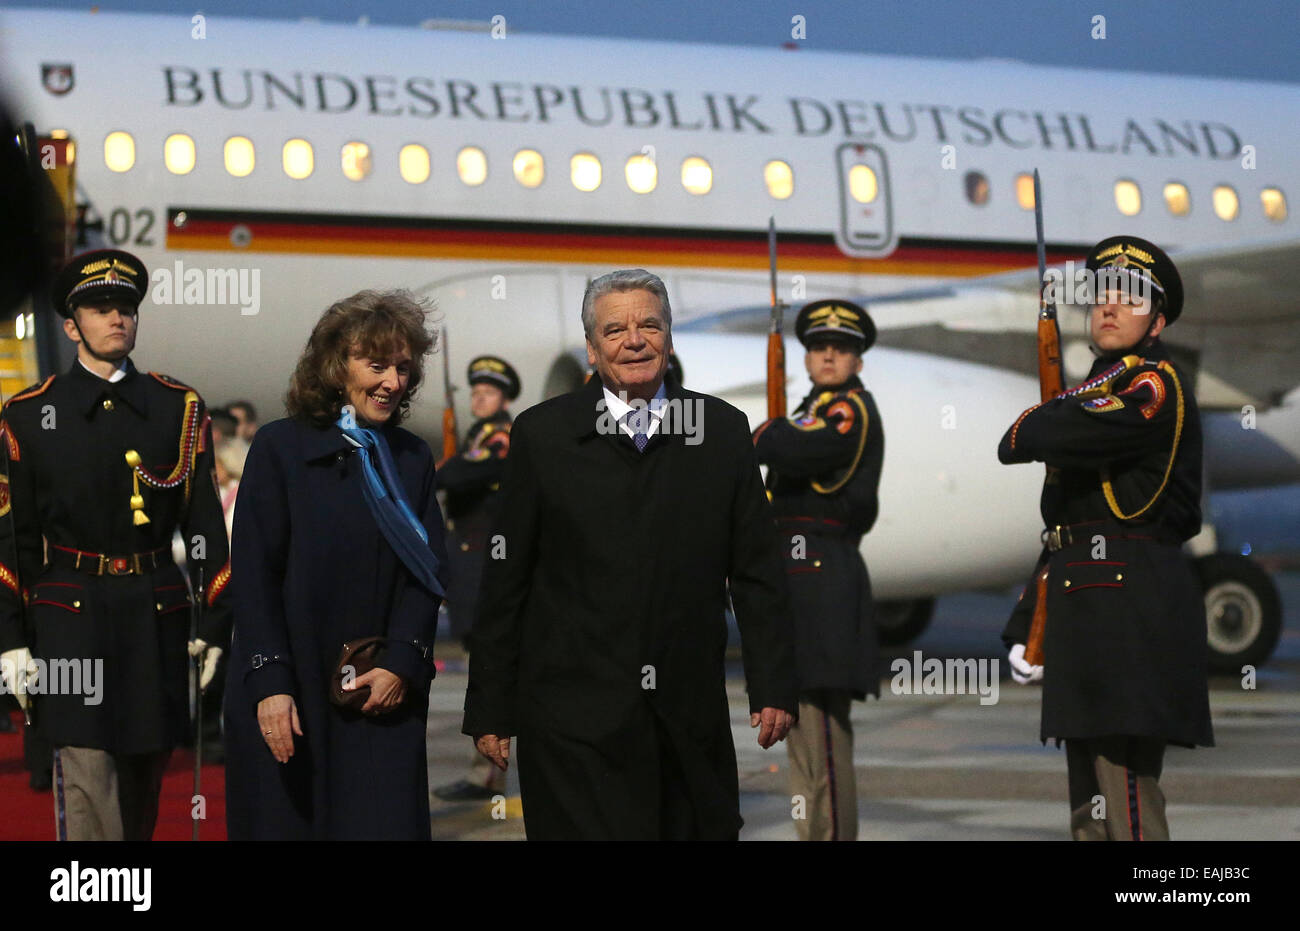 Bratislava, Slovakia. 16th Nov, 2014. German President Joachim Gauck (C) is welcomed with military honours at the airport in Bratislava, Slovakia, 16 November 2014. Gauck participates at the meeting of the presidents of the Visegrád states and of Germany on occasion of the commemoration '25 Jahre Friedliche Revolution' (lit. '25 years of peaceful revolution'). Photo: Wolfgang Kumm/dpa/Alamy Live News Stock Photo